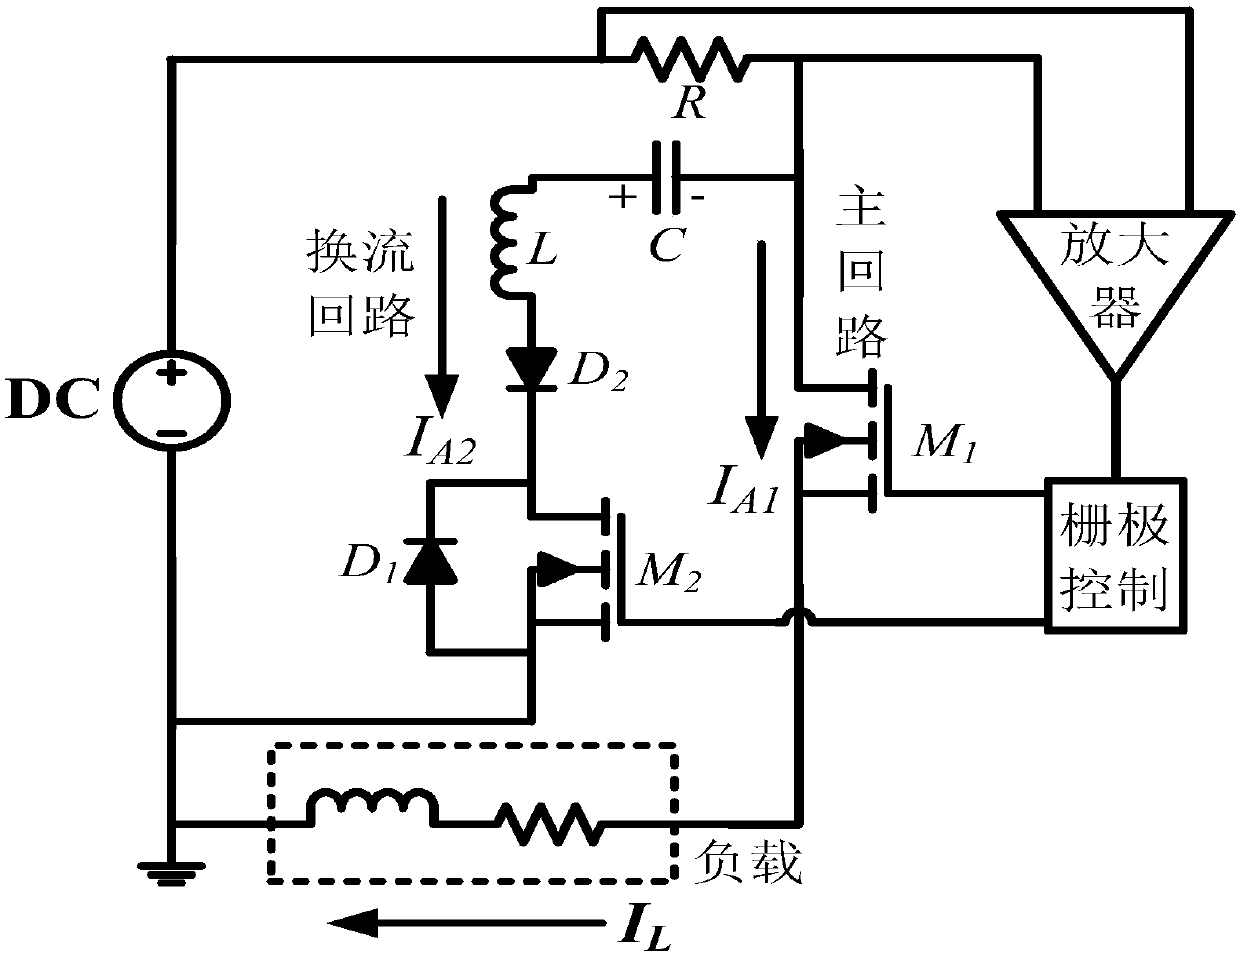 Cathode short MOS-controlled thyristor-based DC solid state circuit breaker